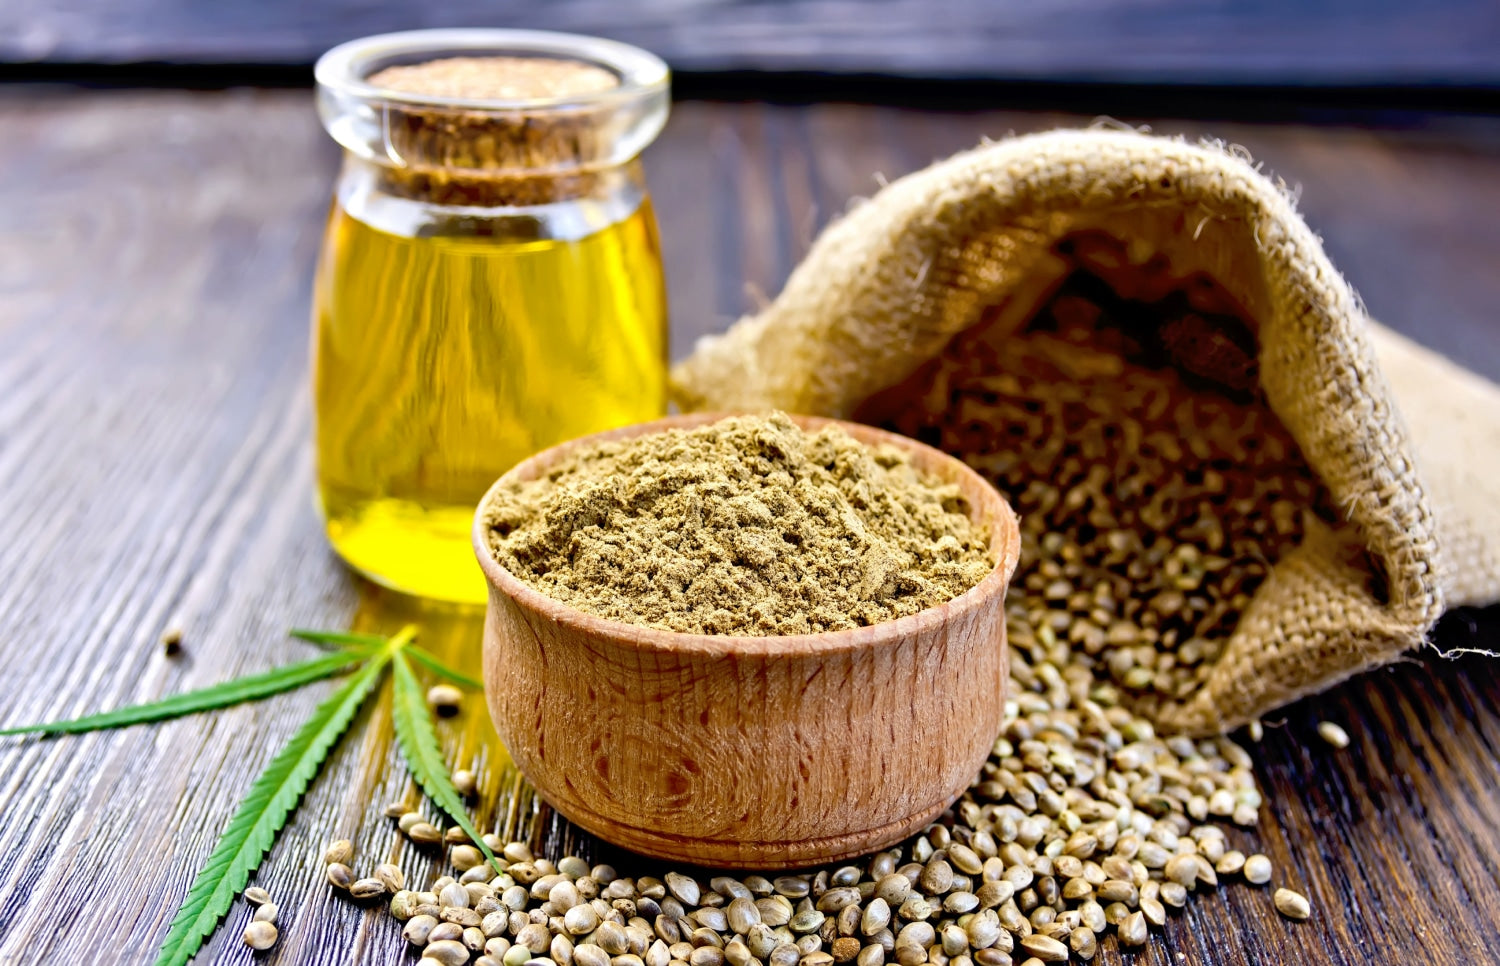 Hemp Seed Oil vs. CBD Oil: What’s the Difference?